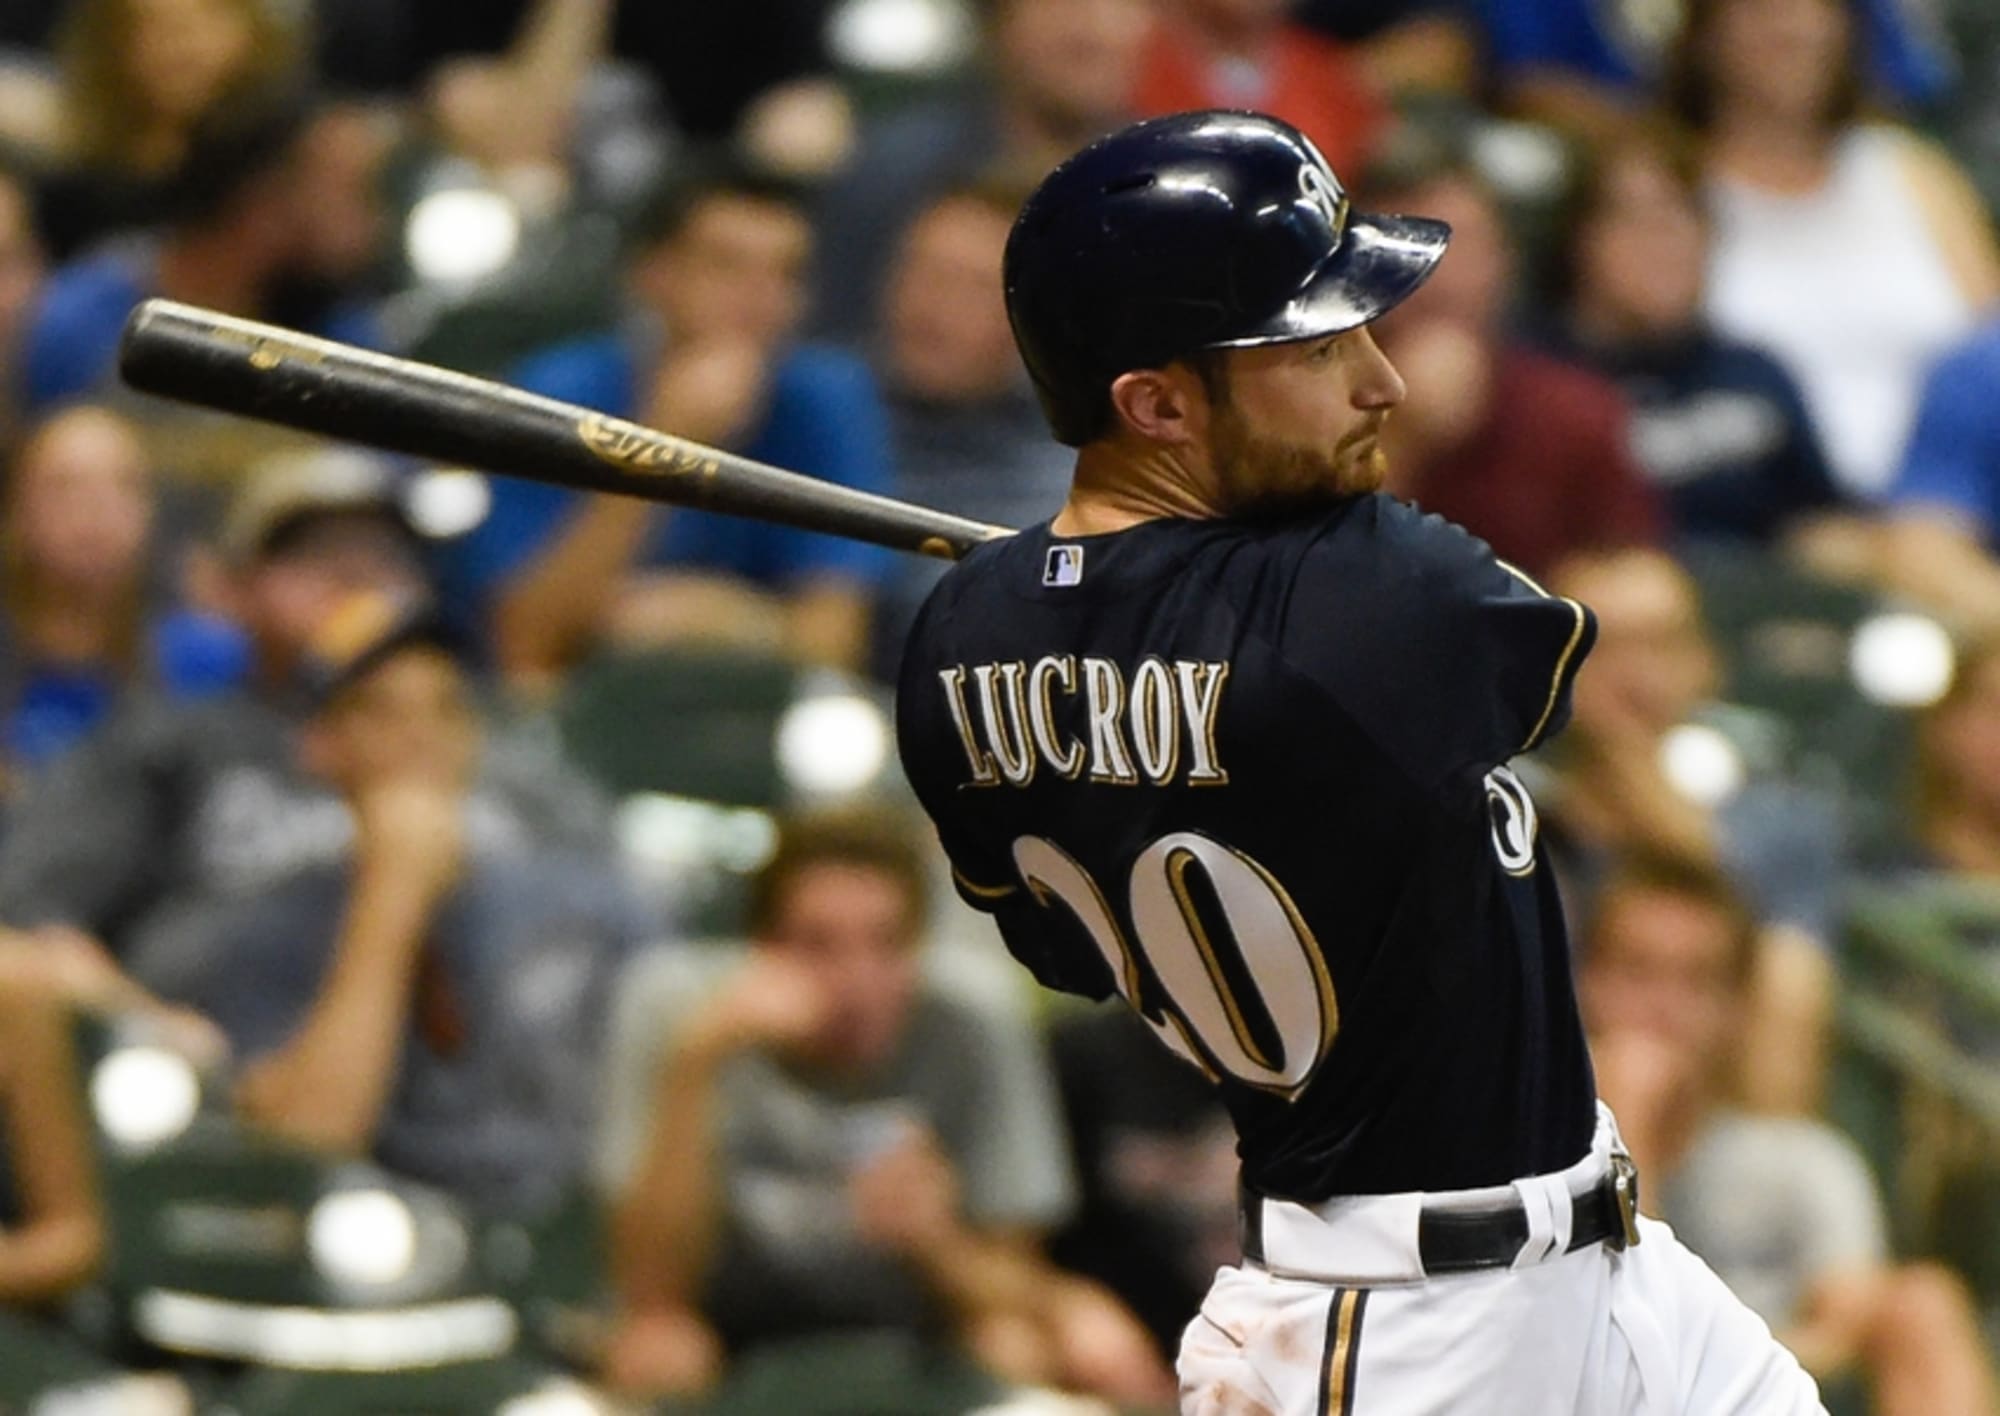 Brewers should get starting pitcher in Lucroy trade